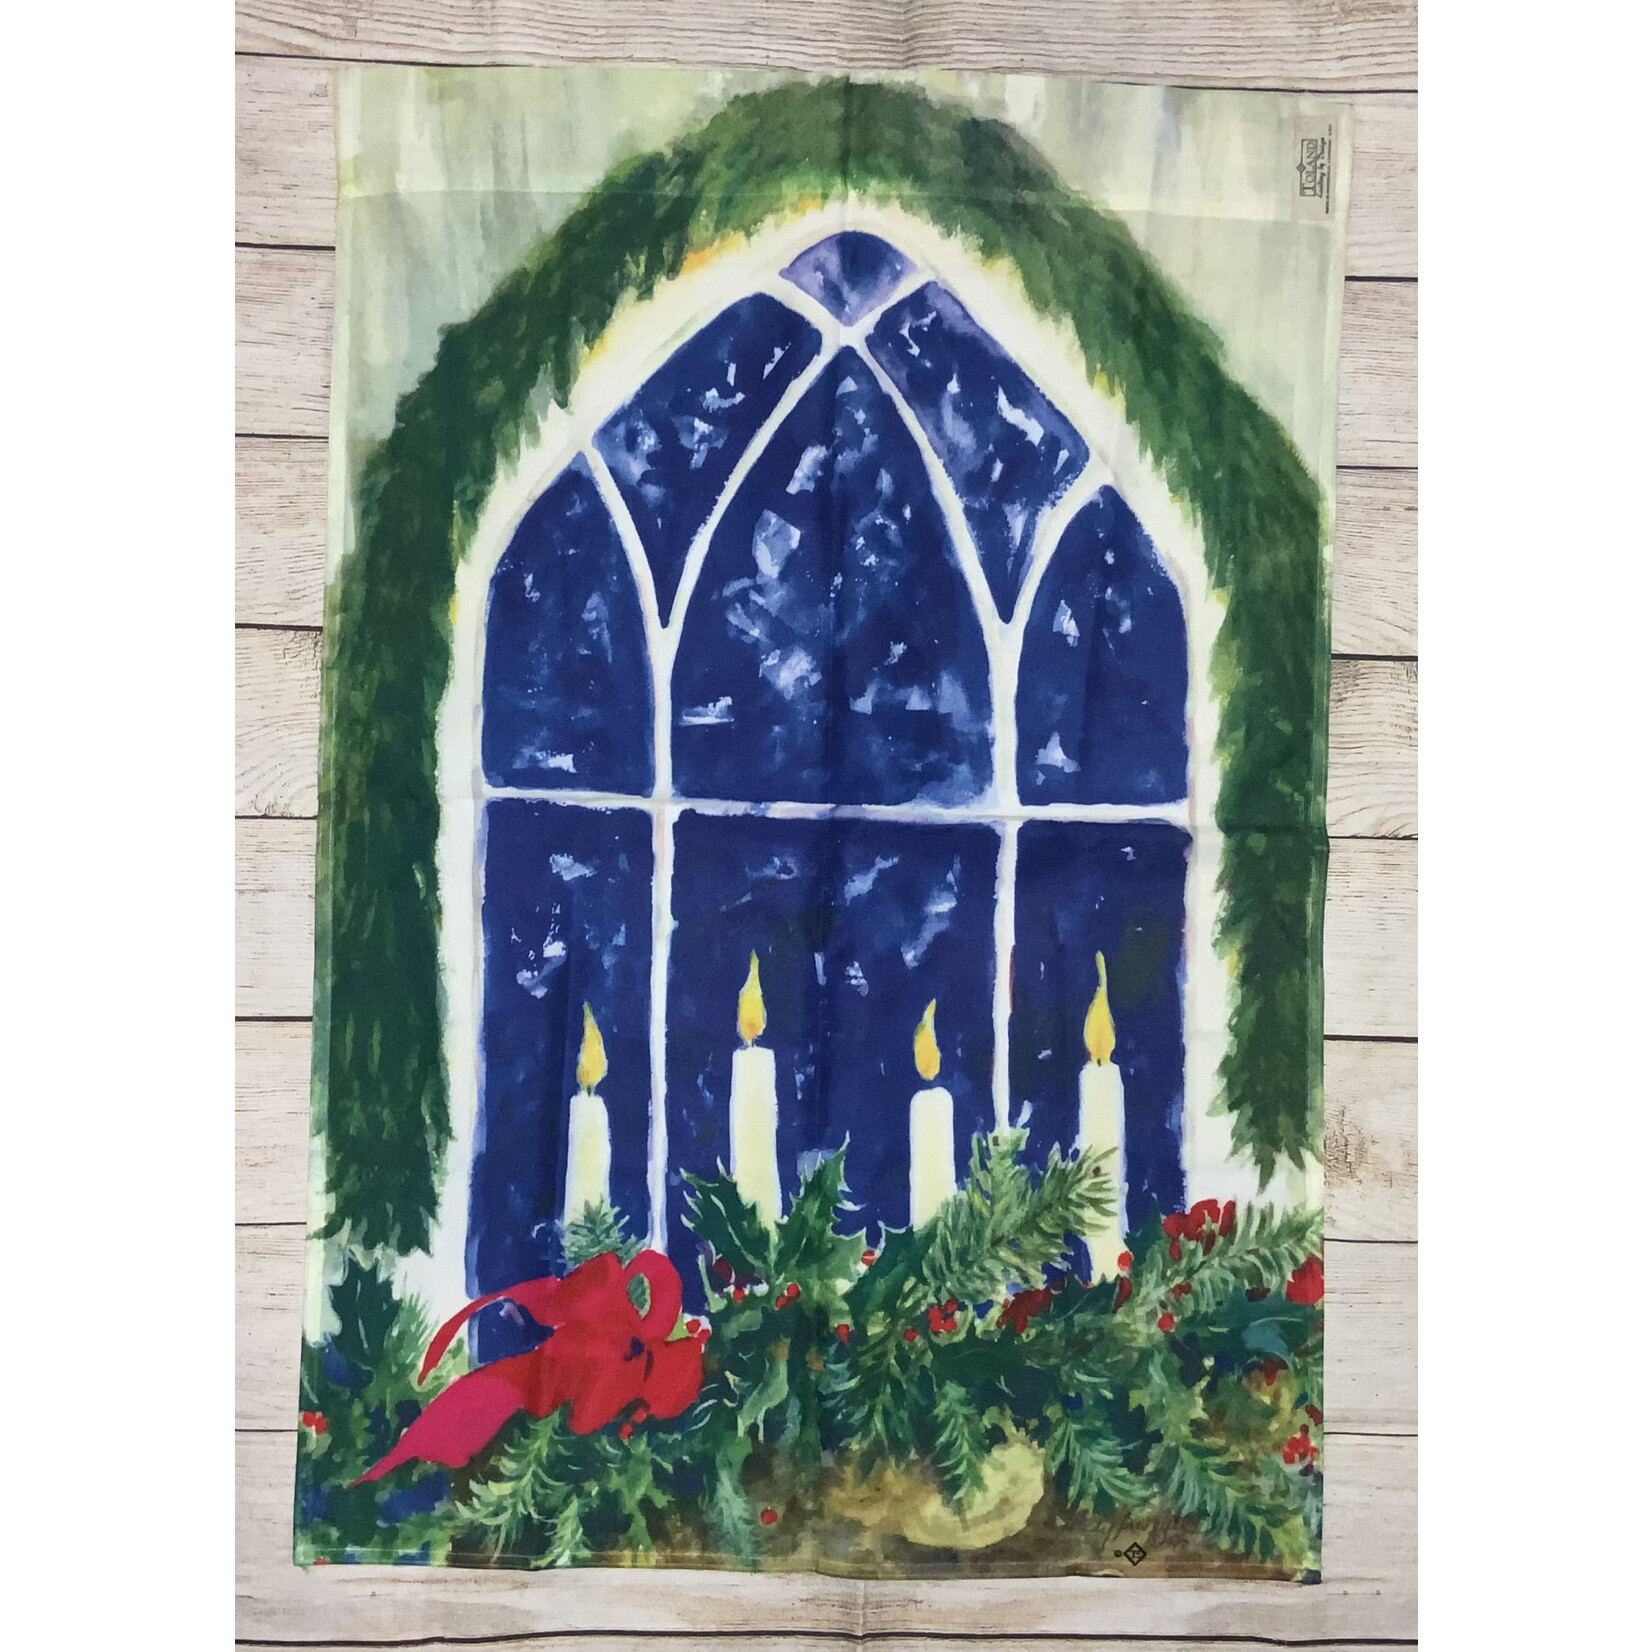 Toland Candles in a Window House Flag